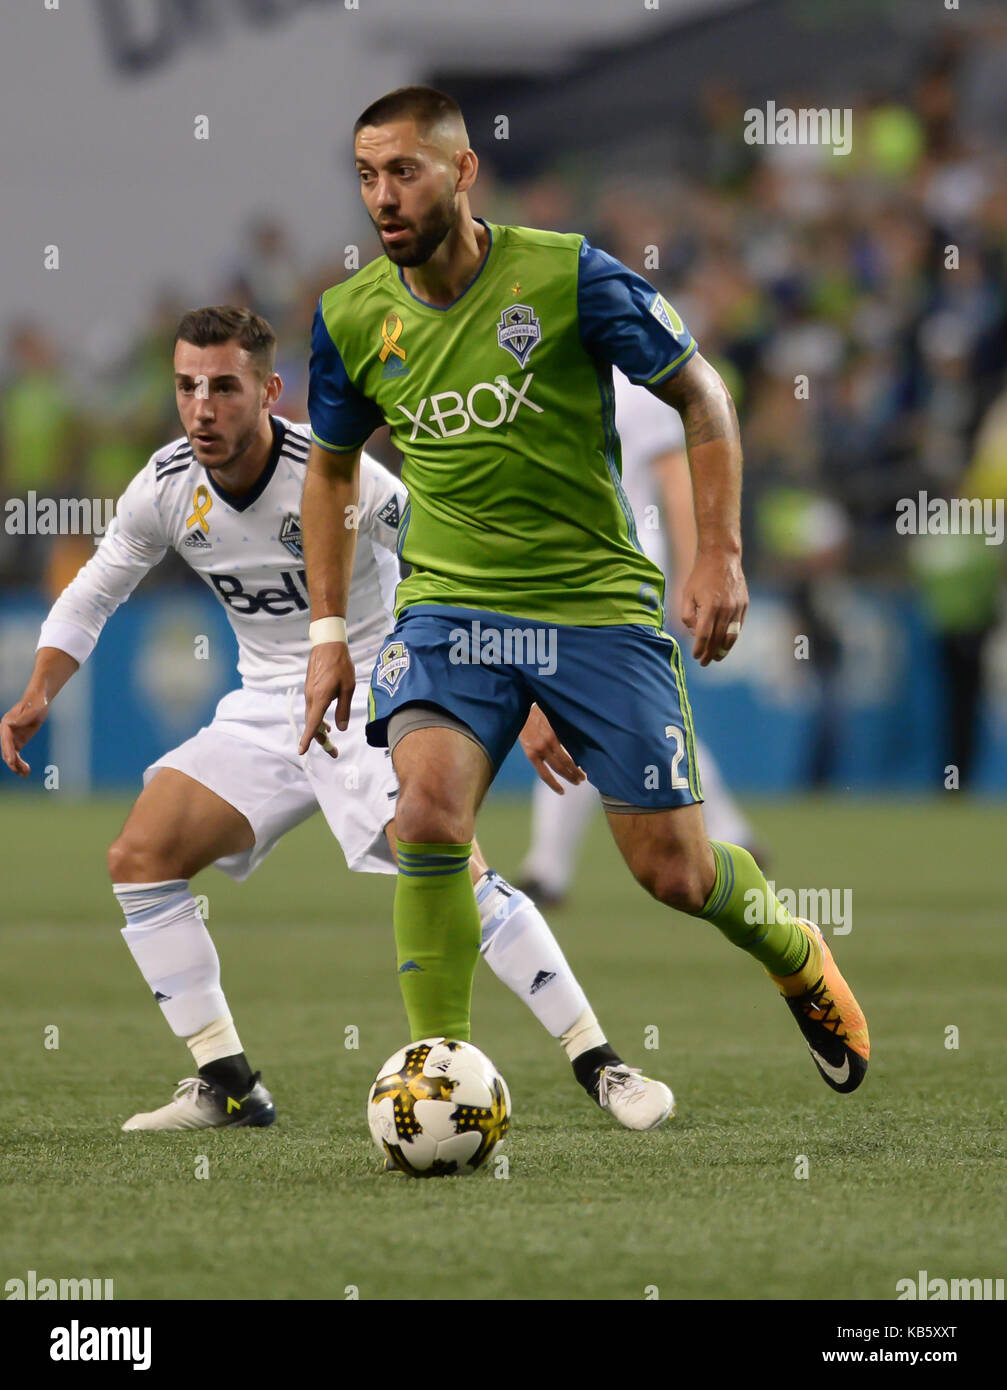 Seattle, WASHINGTON, USA. 27th Sep, 2017. Soccer 2017: The Sounders CLINT DEMPSEY (2) in action as the Vancouver Whitecaps visit the Seattle Sounders for an MLS match at Century Link Field in Seattle, WA. Credit: Jeff Halstead/ZUMA Wire/Alamy Live News Stock Photo